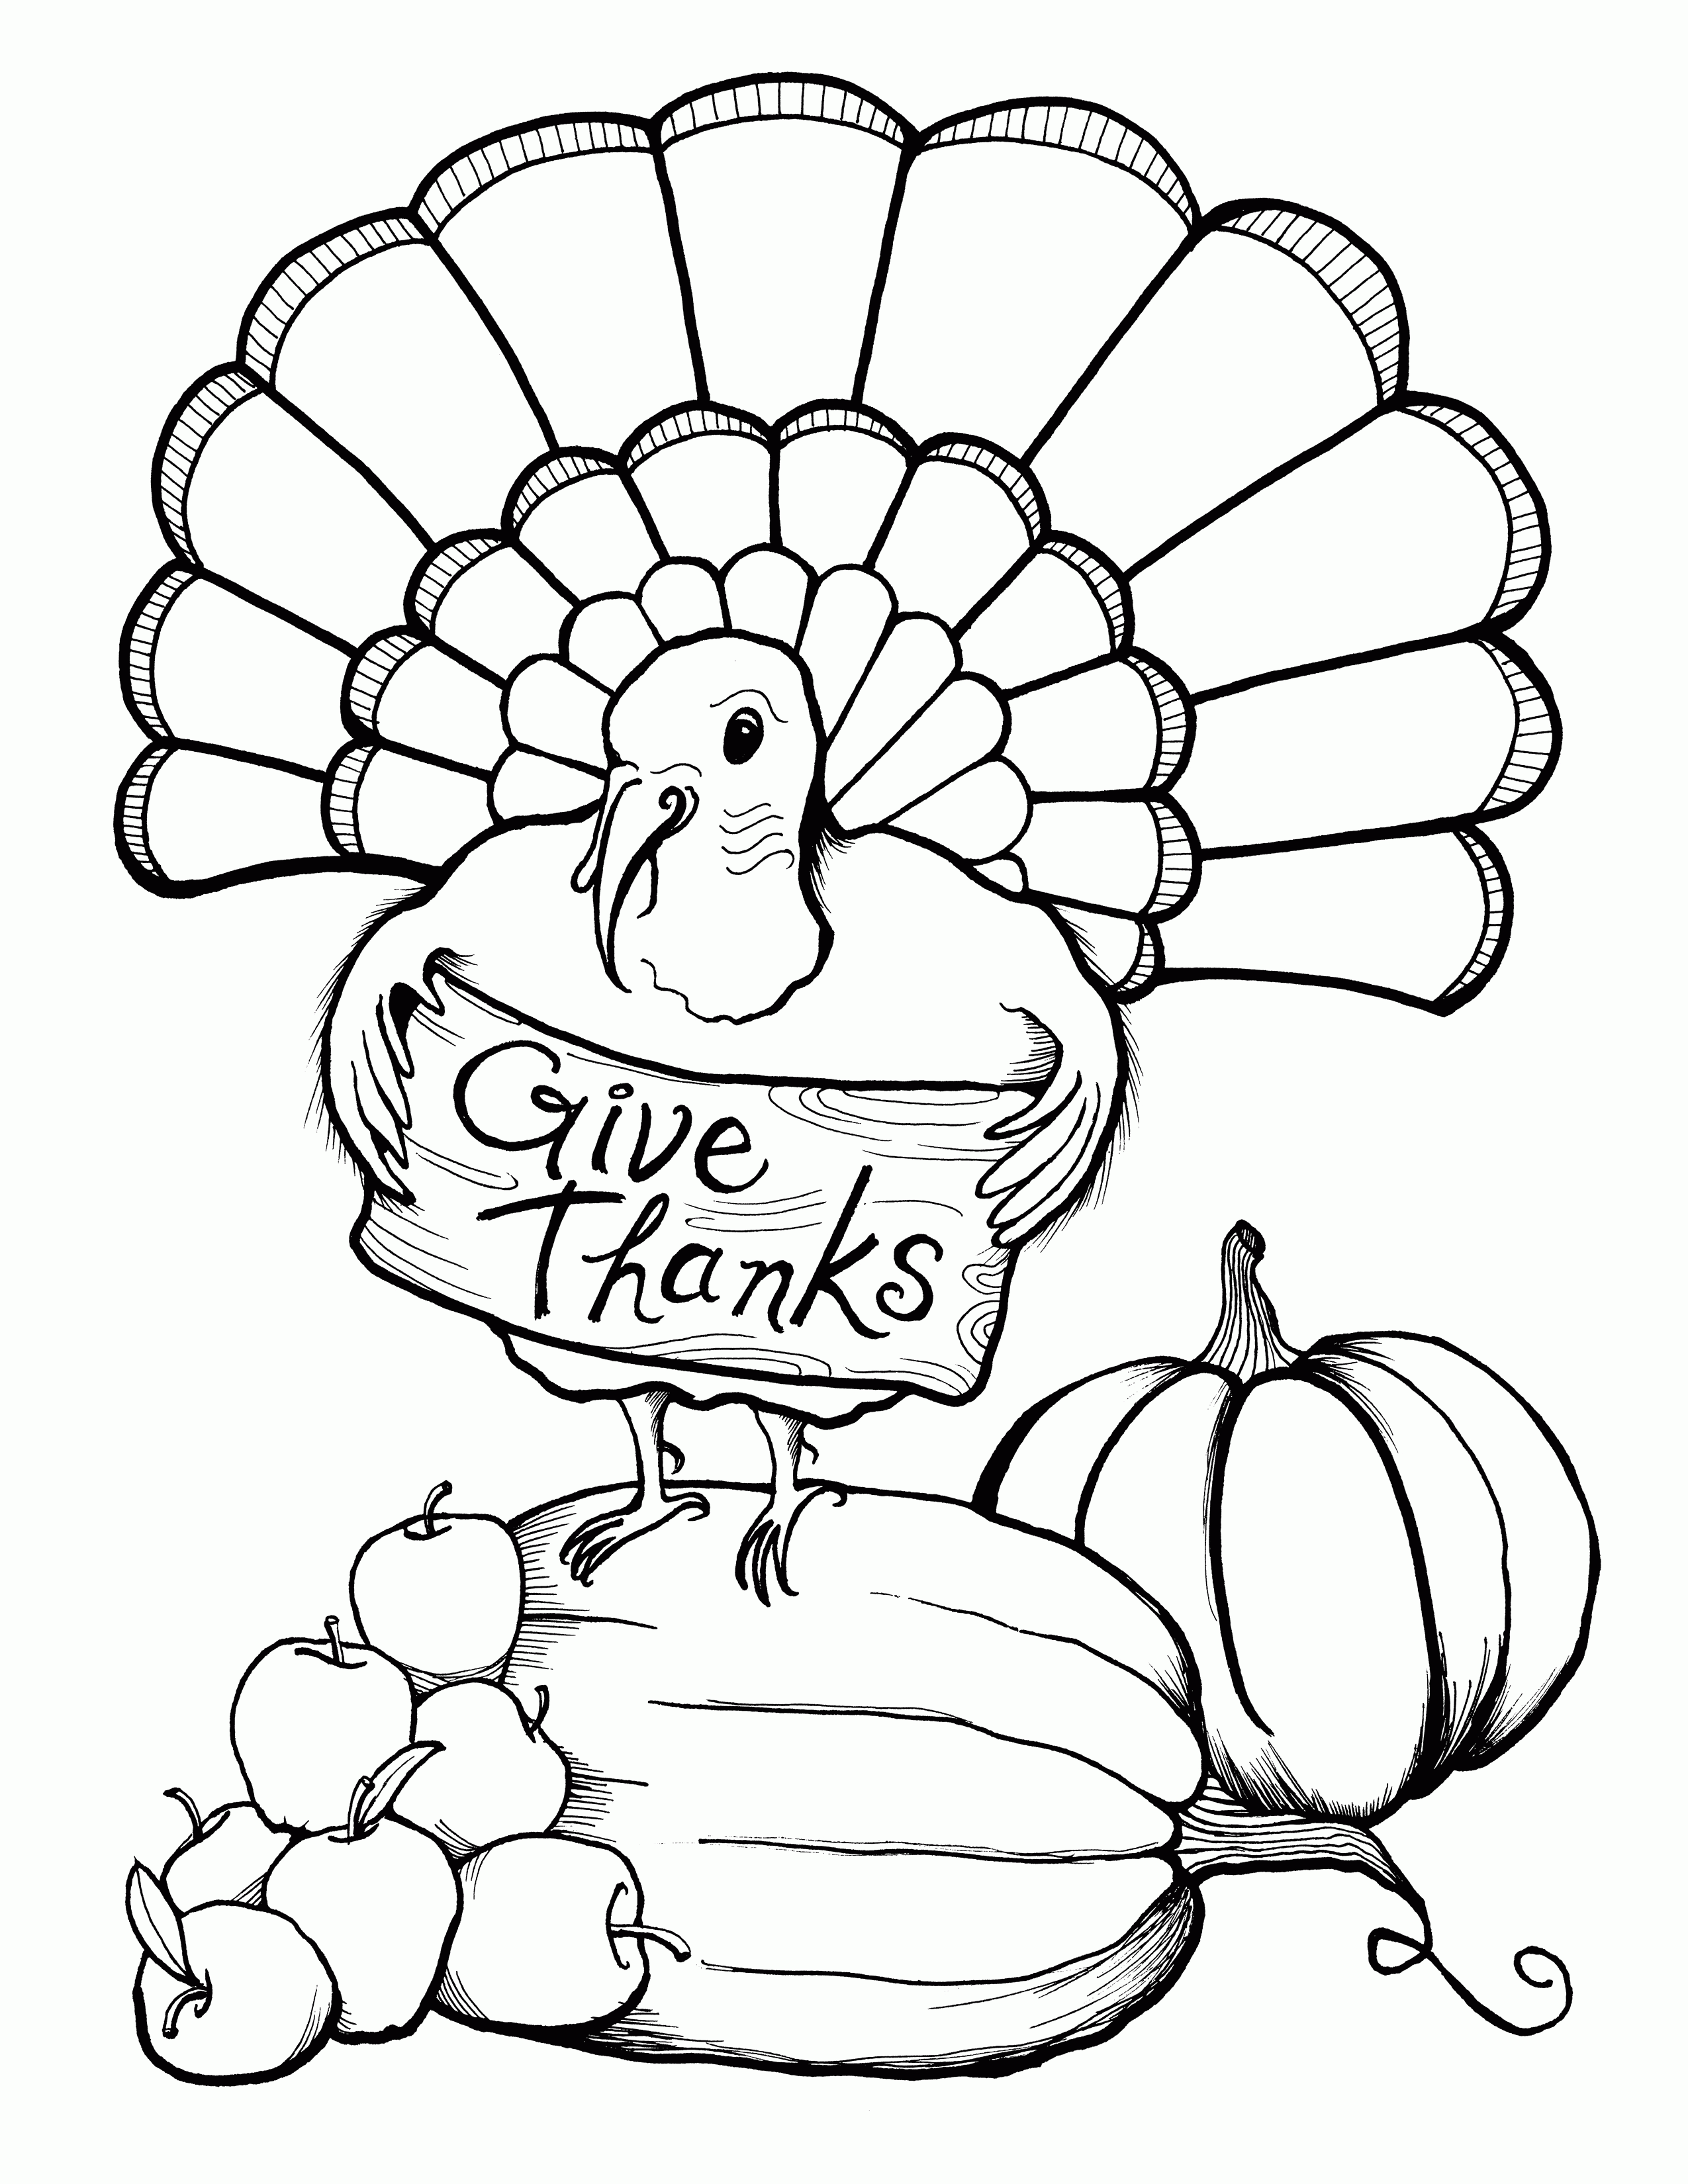 Thanksgiving Preschool Coloring Pages - Coloring Home